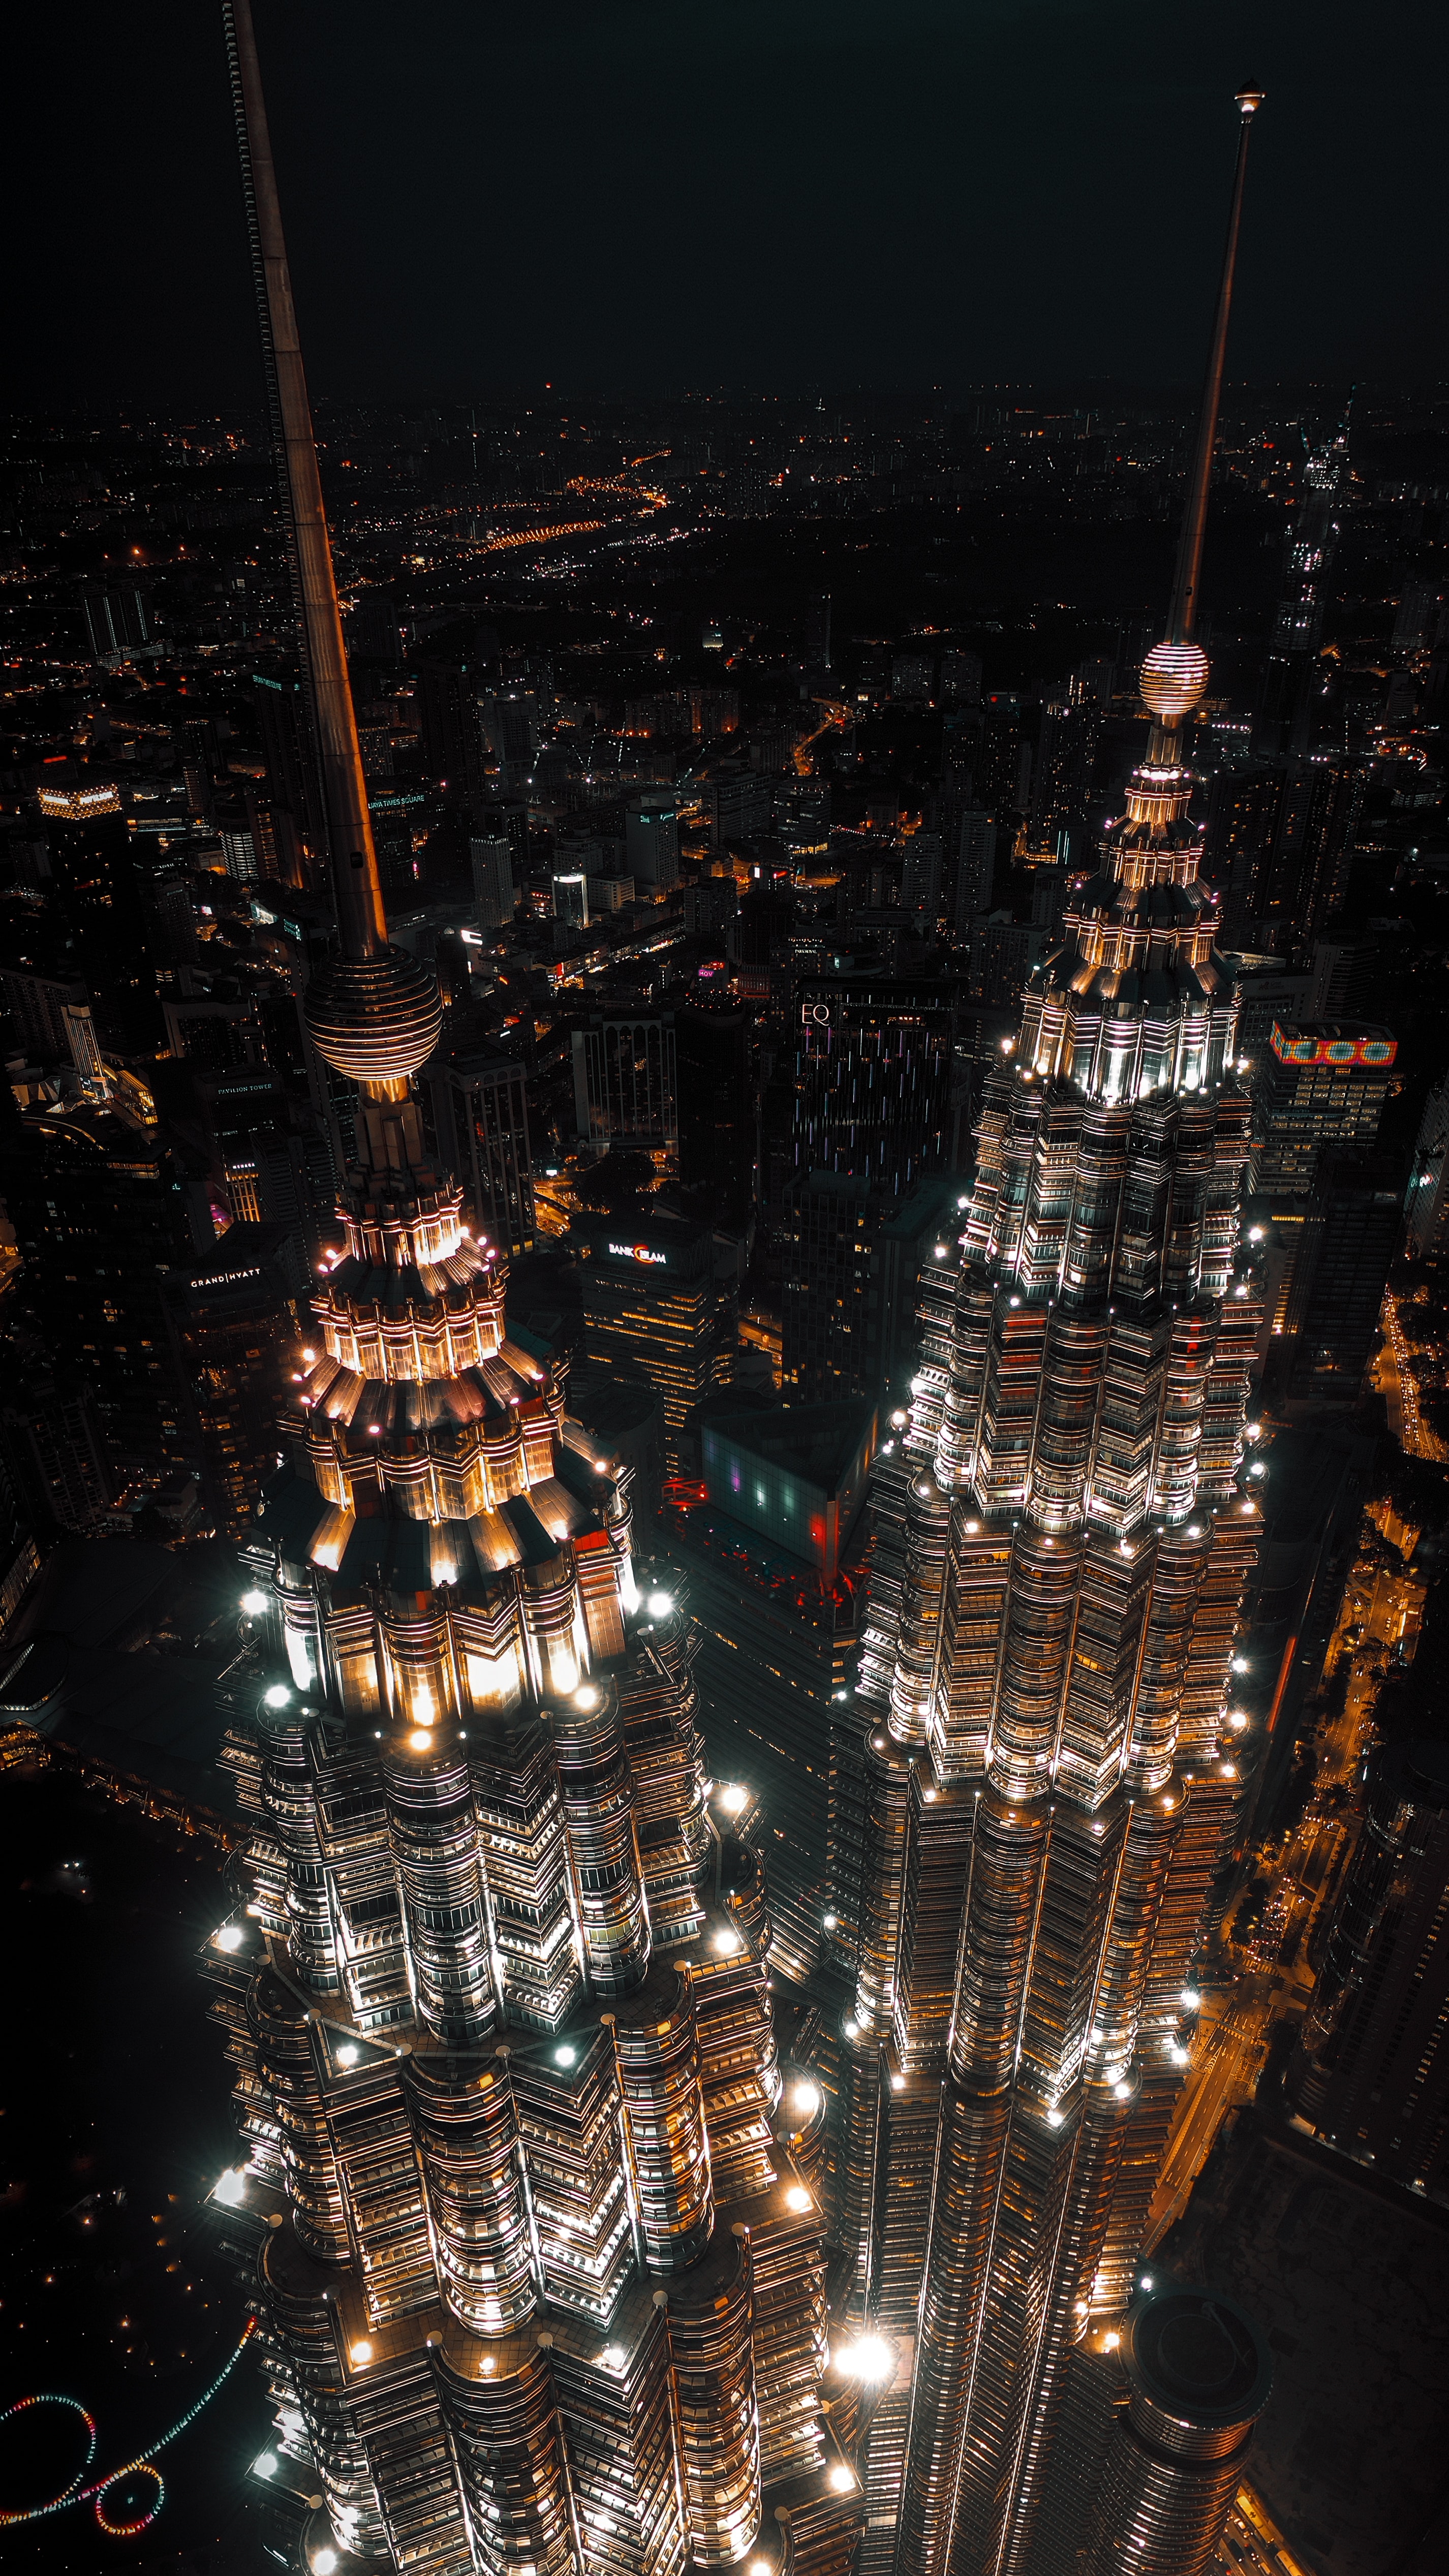 Marvelous Architecture of Petronas Twin Tower